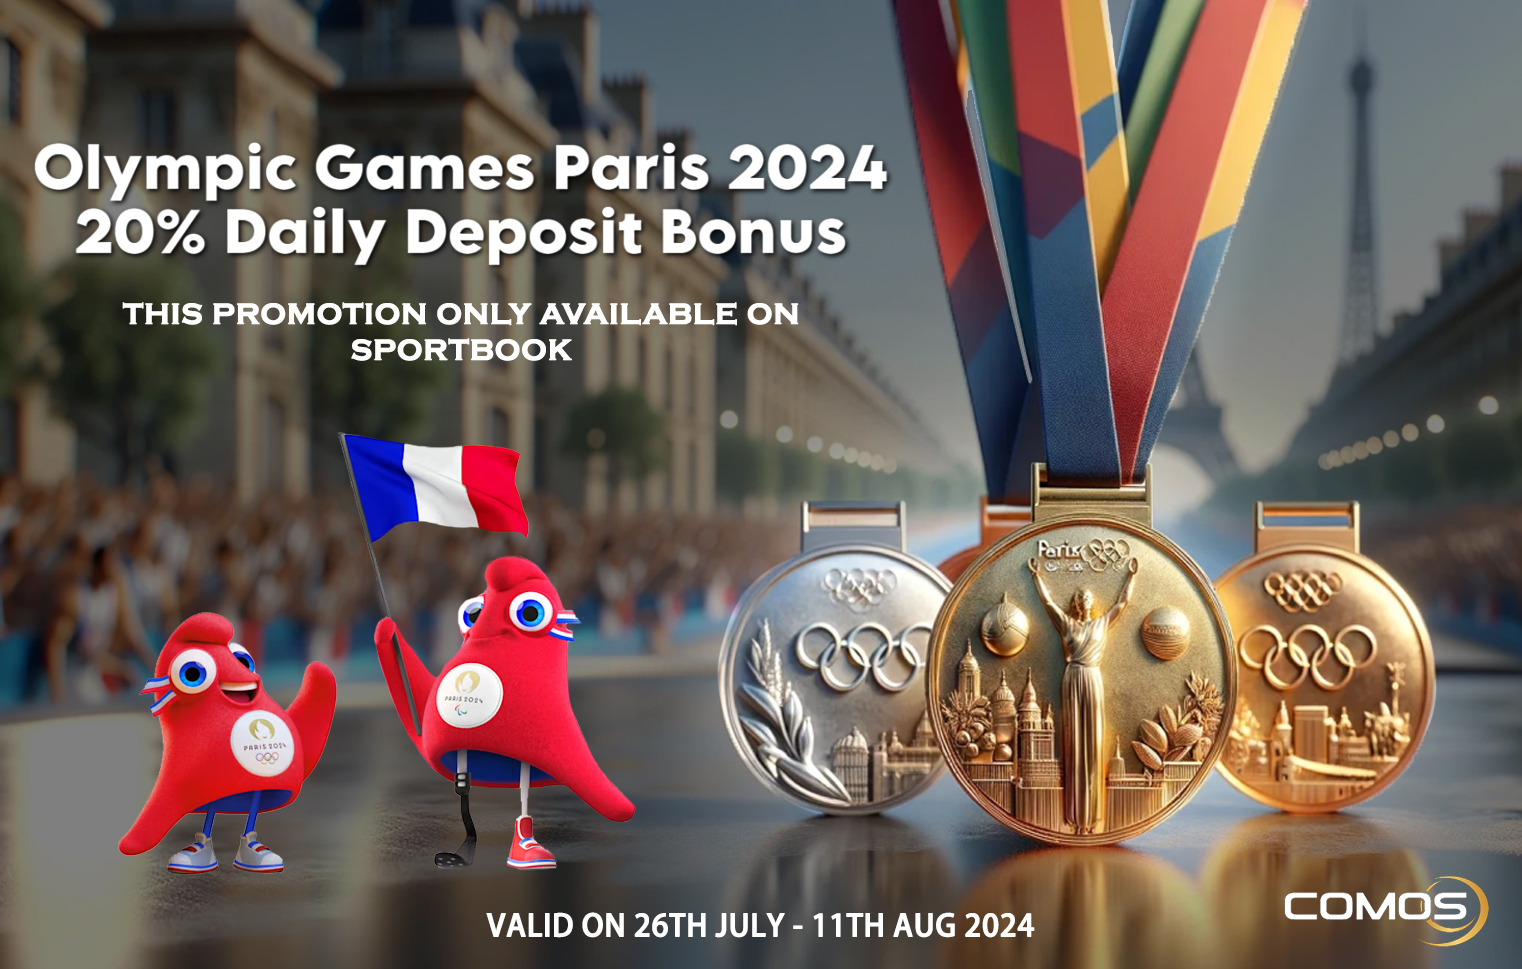 Olympic Game Paris 2024 20% Daily Deposit Bonus This Promotion Only For Sportbook  ( Valid On 26th July - 11th August 2024 )